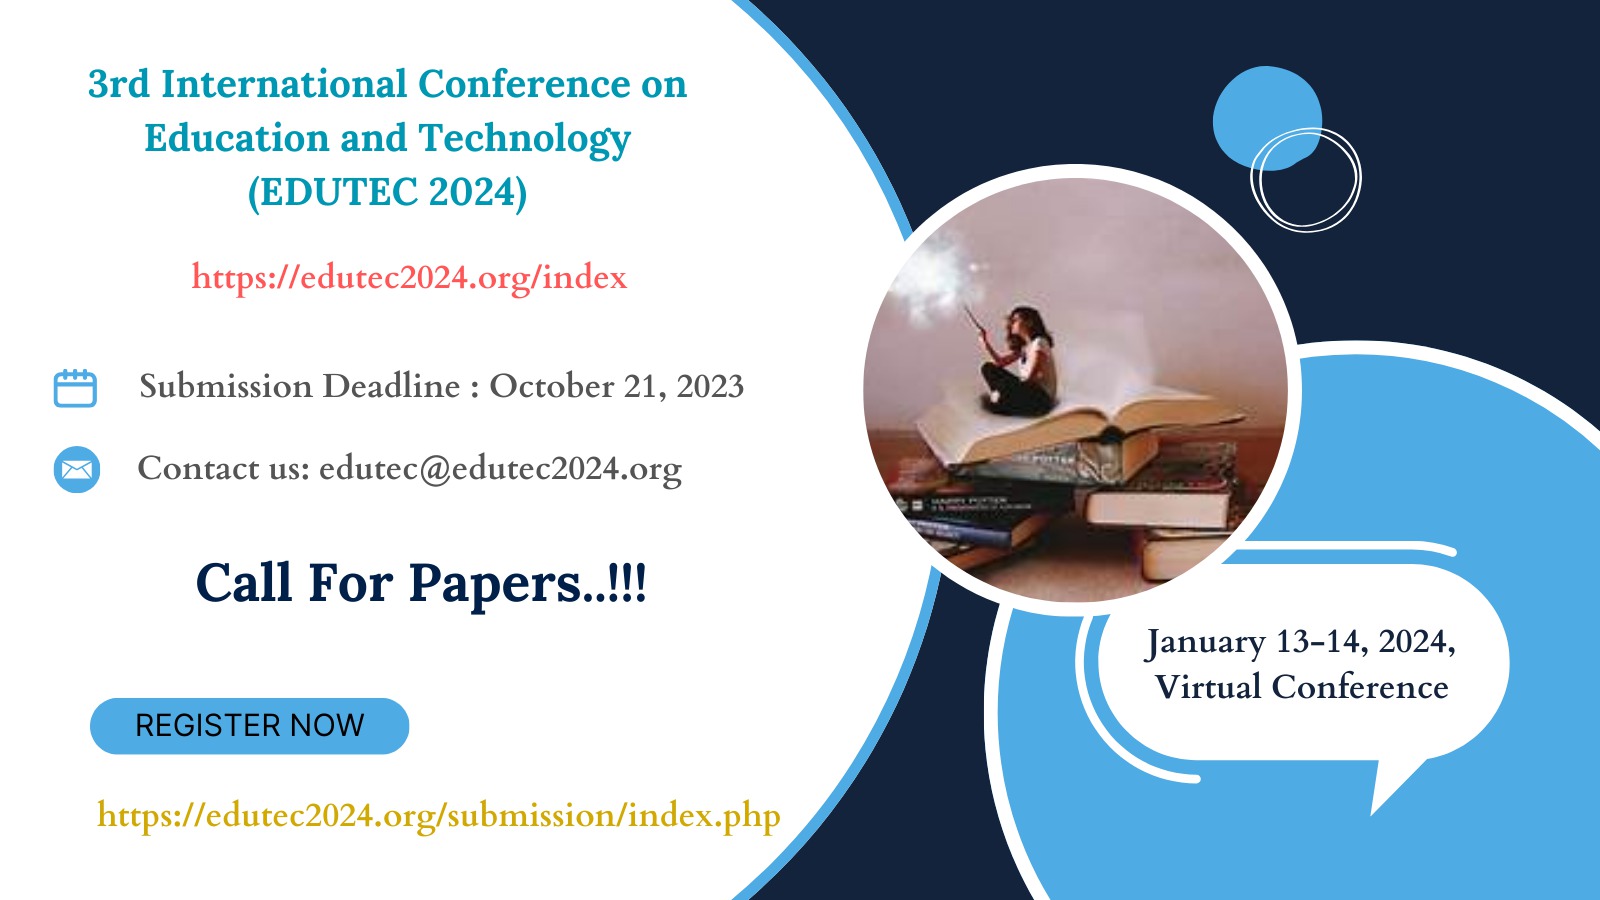 3rd International Conference on Education and Technology